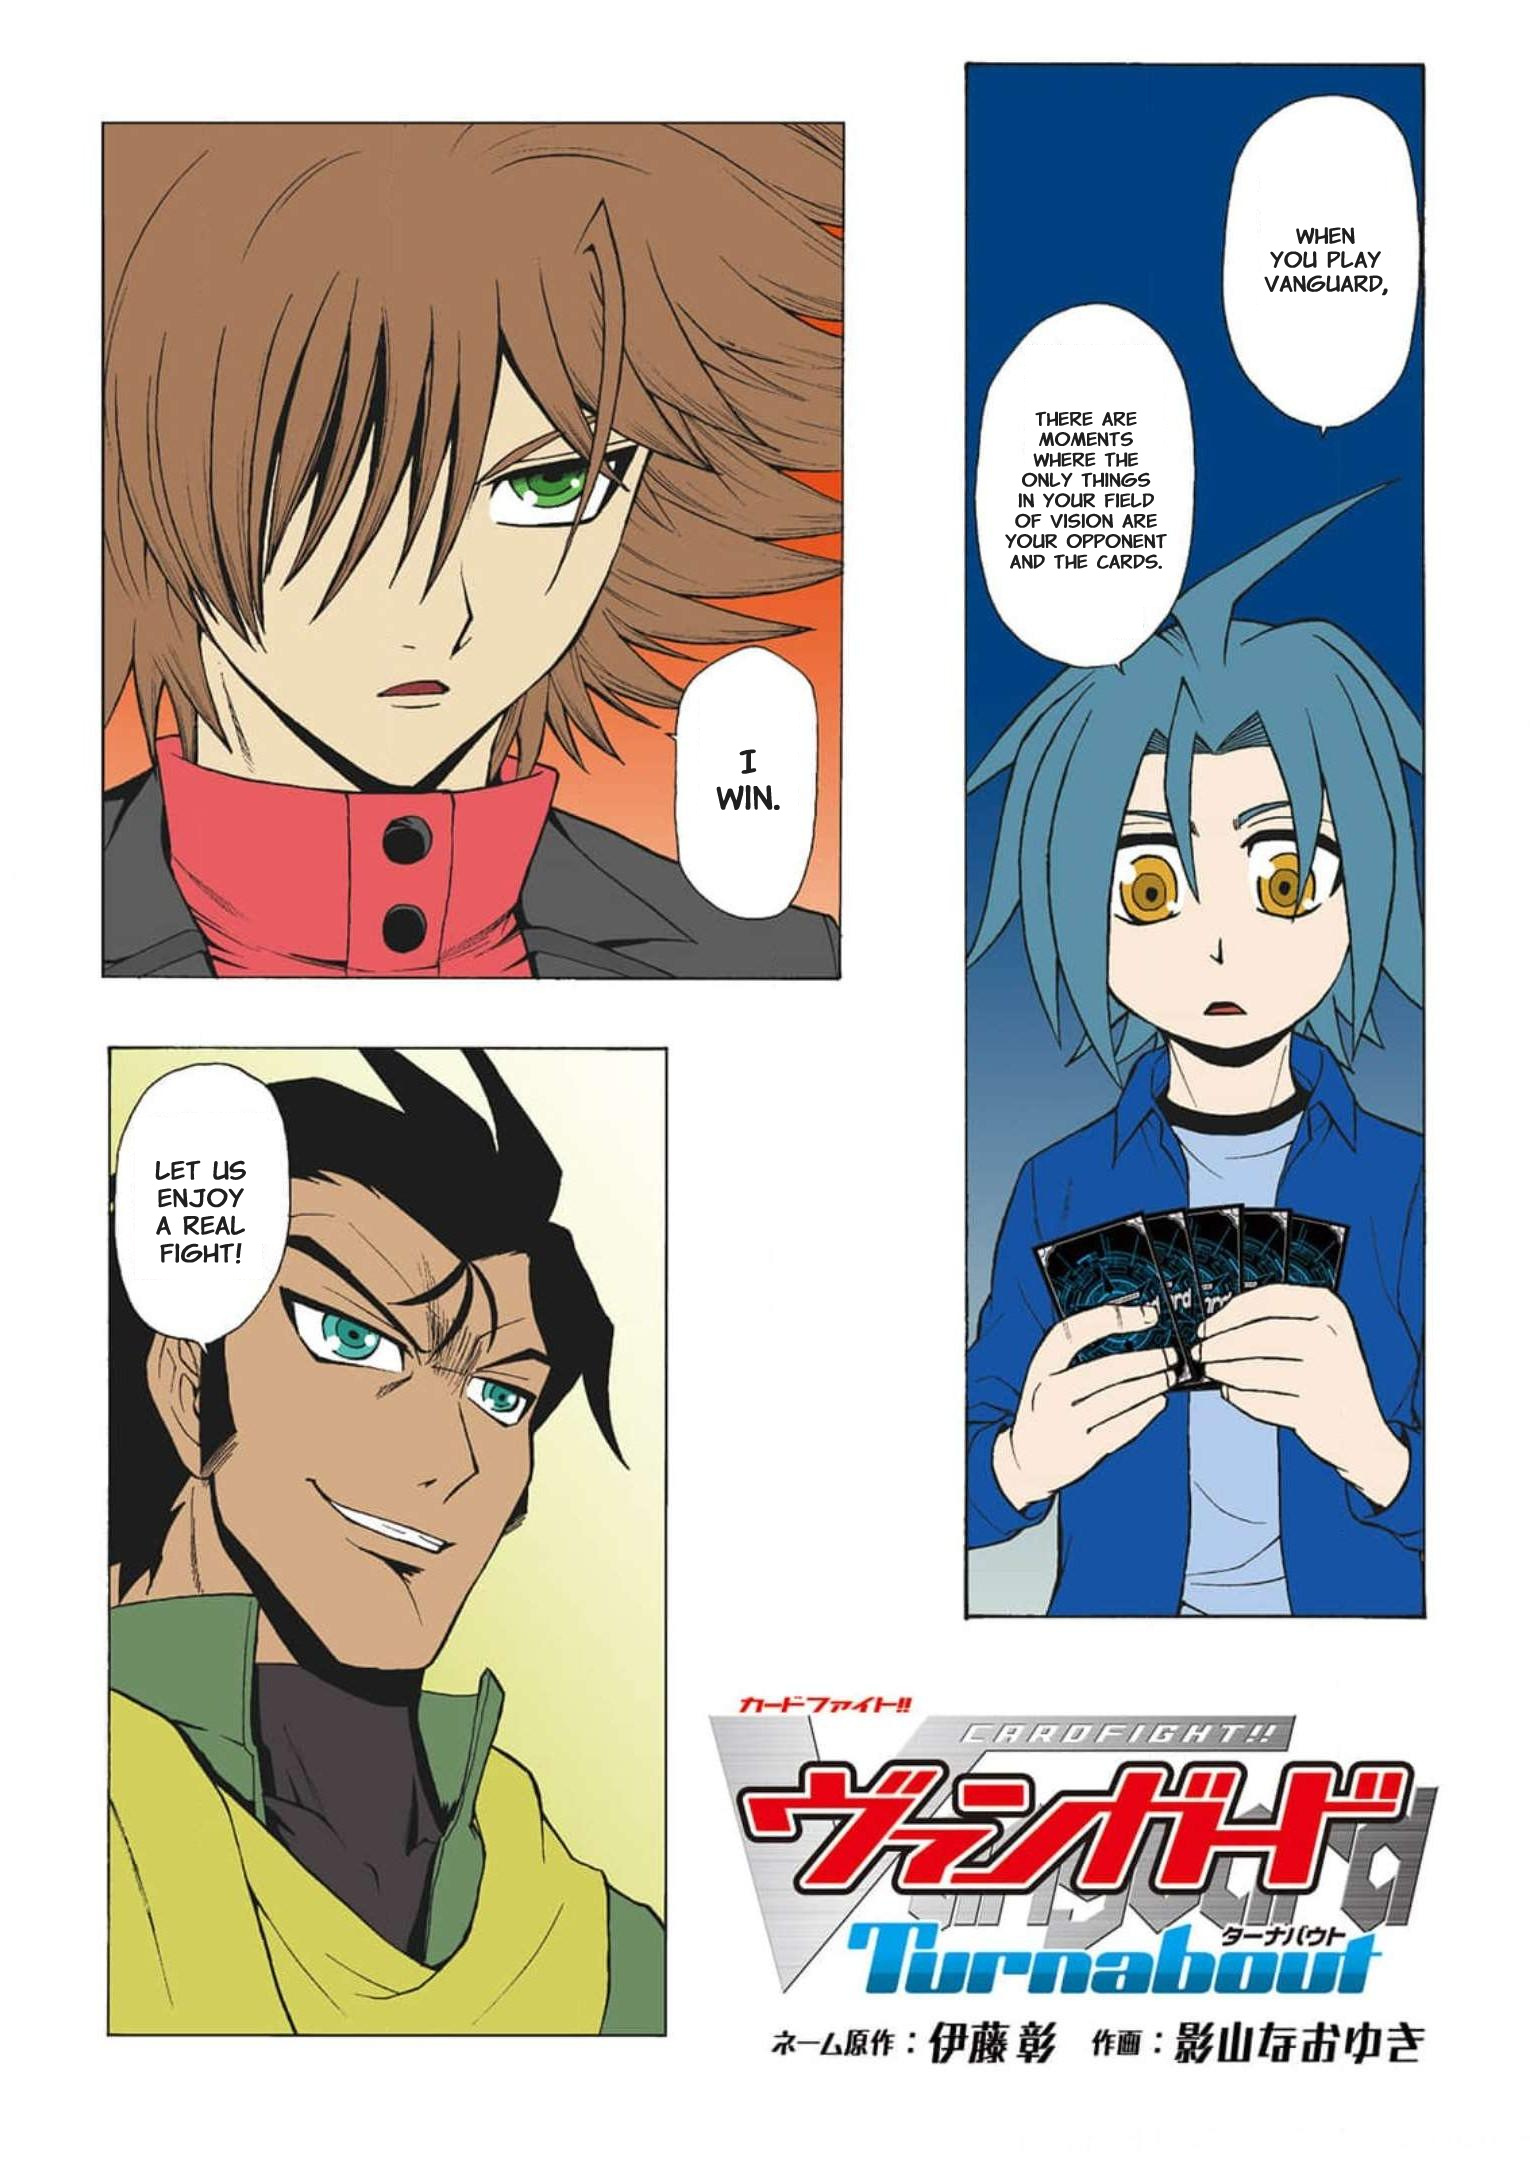 Cardfight!! Vanguard: Turnabout Vol.2 Chapter 8: Feeling - Picture 2